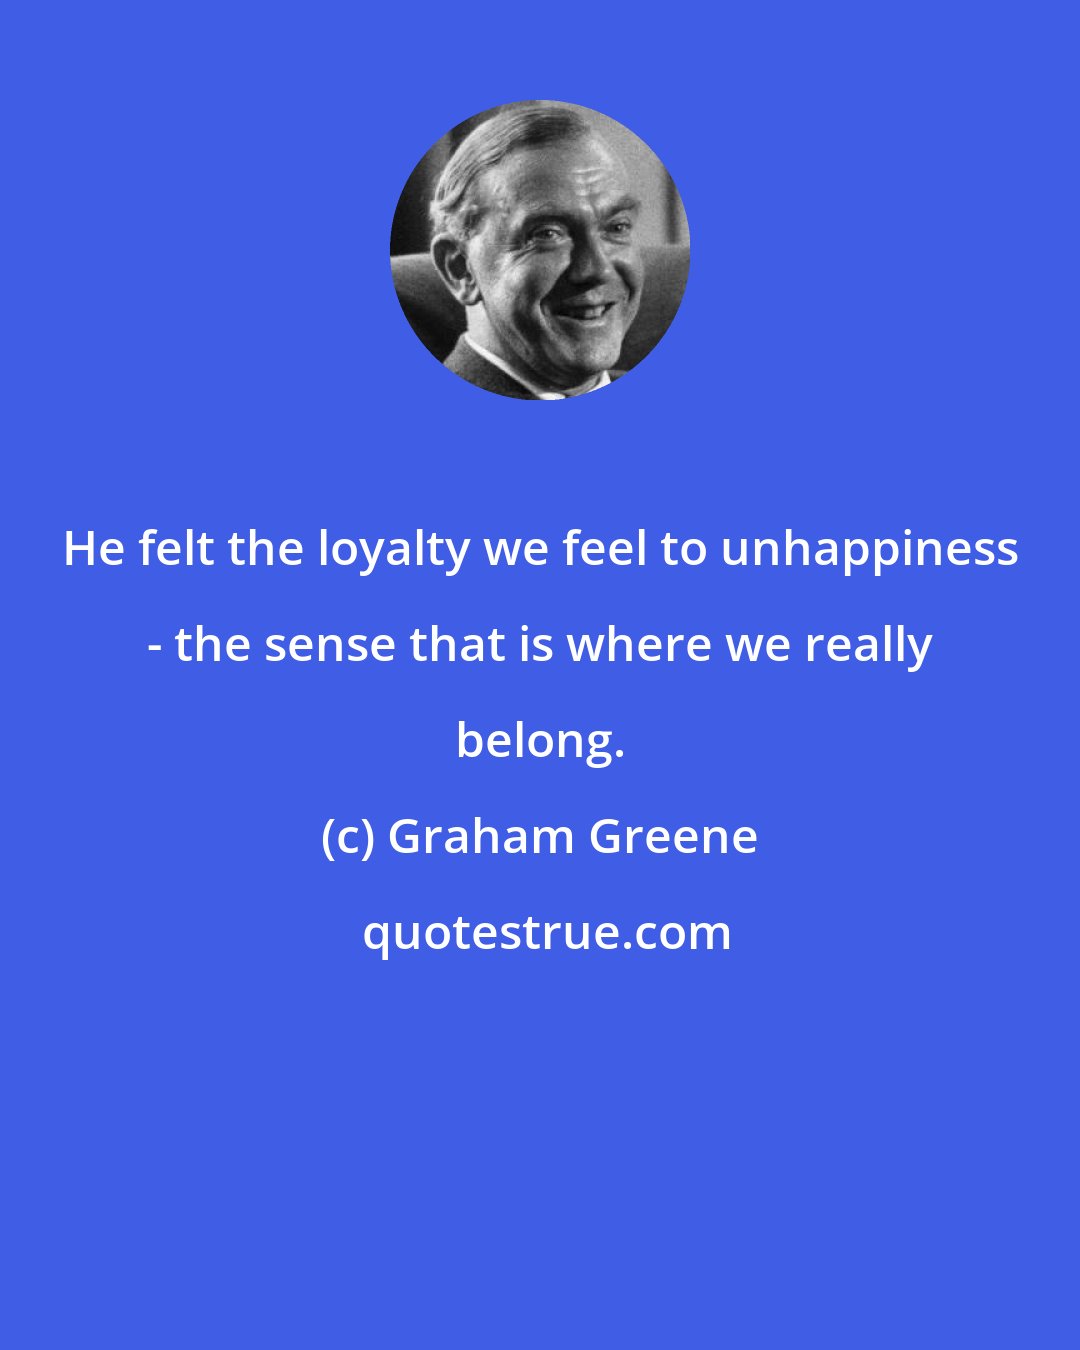 Graham Greene: He felt the loyalty we feel to unhappiness - the sense that is where we really belong.